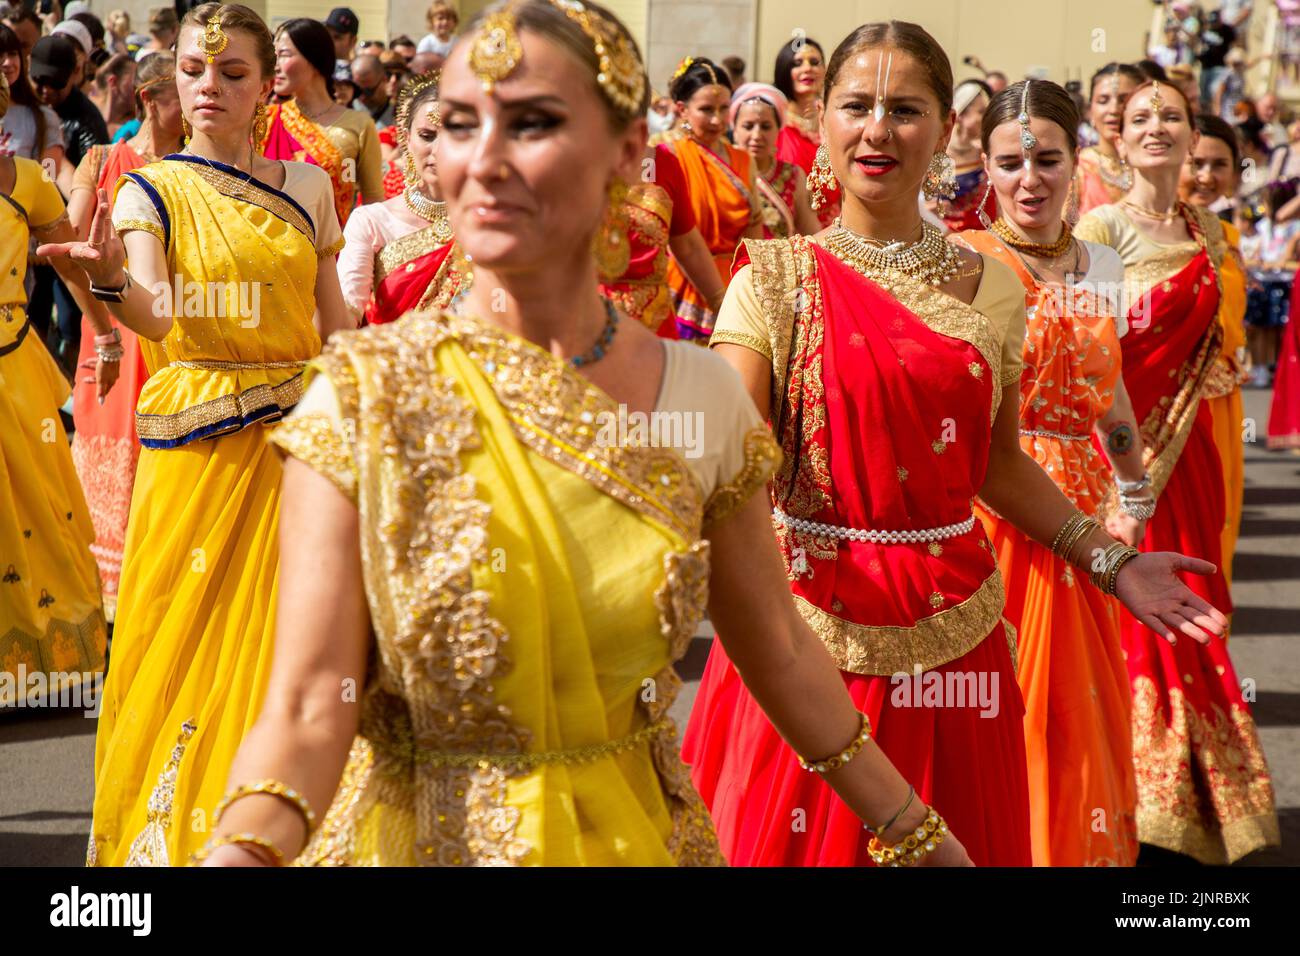 Moscow, Russia. 13th of August, 2022. Russian women in Indian national costumes sing 'Hare Krishna' and dance at the head of the procession of the Ratha Yatra parade, or the Hindu religious Chariot Festival, as part of the India Day festival taking place in Dream Island Park of Moscow, Russia Stock Photo